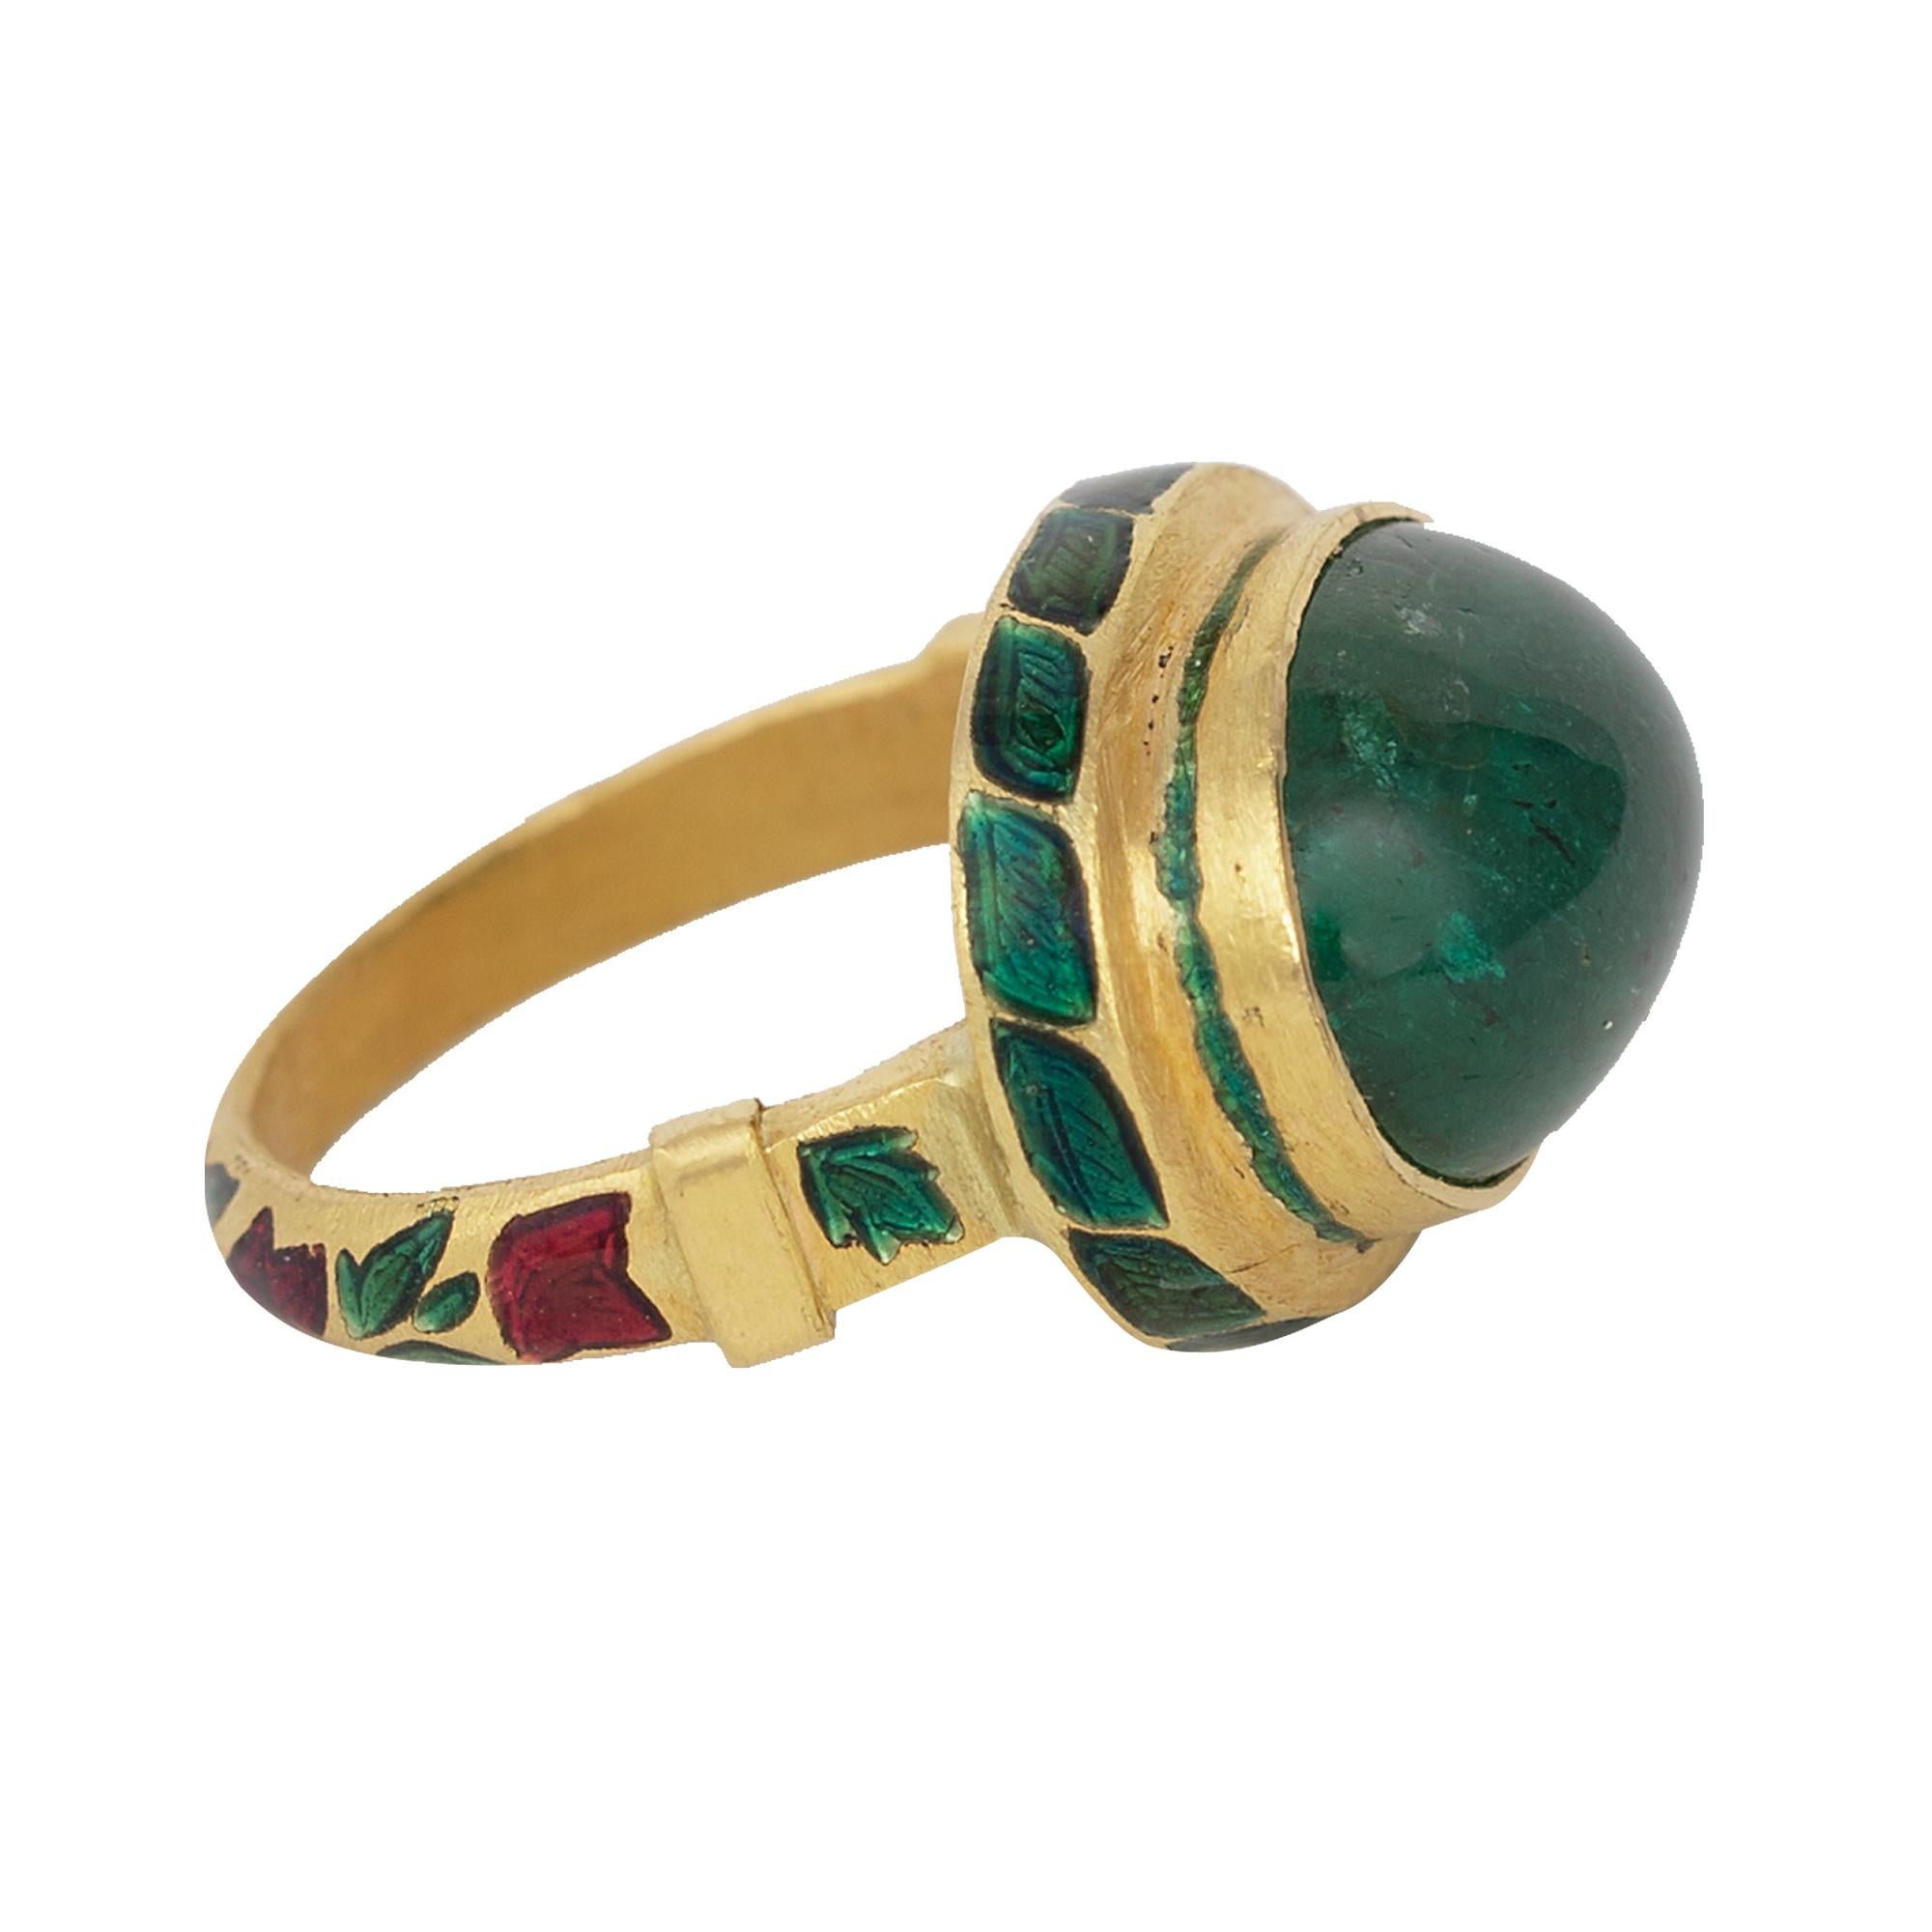 22 Karat Gold 7.13 Carat Natural Emerald Cabochon Ring with Enamel Work

This majestic Mughal era style hand-made forest green emerald cabochon ring with green and red enamel is marvelous. The oval shaped emerald cabochon is set in a long gold bezel